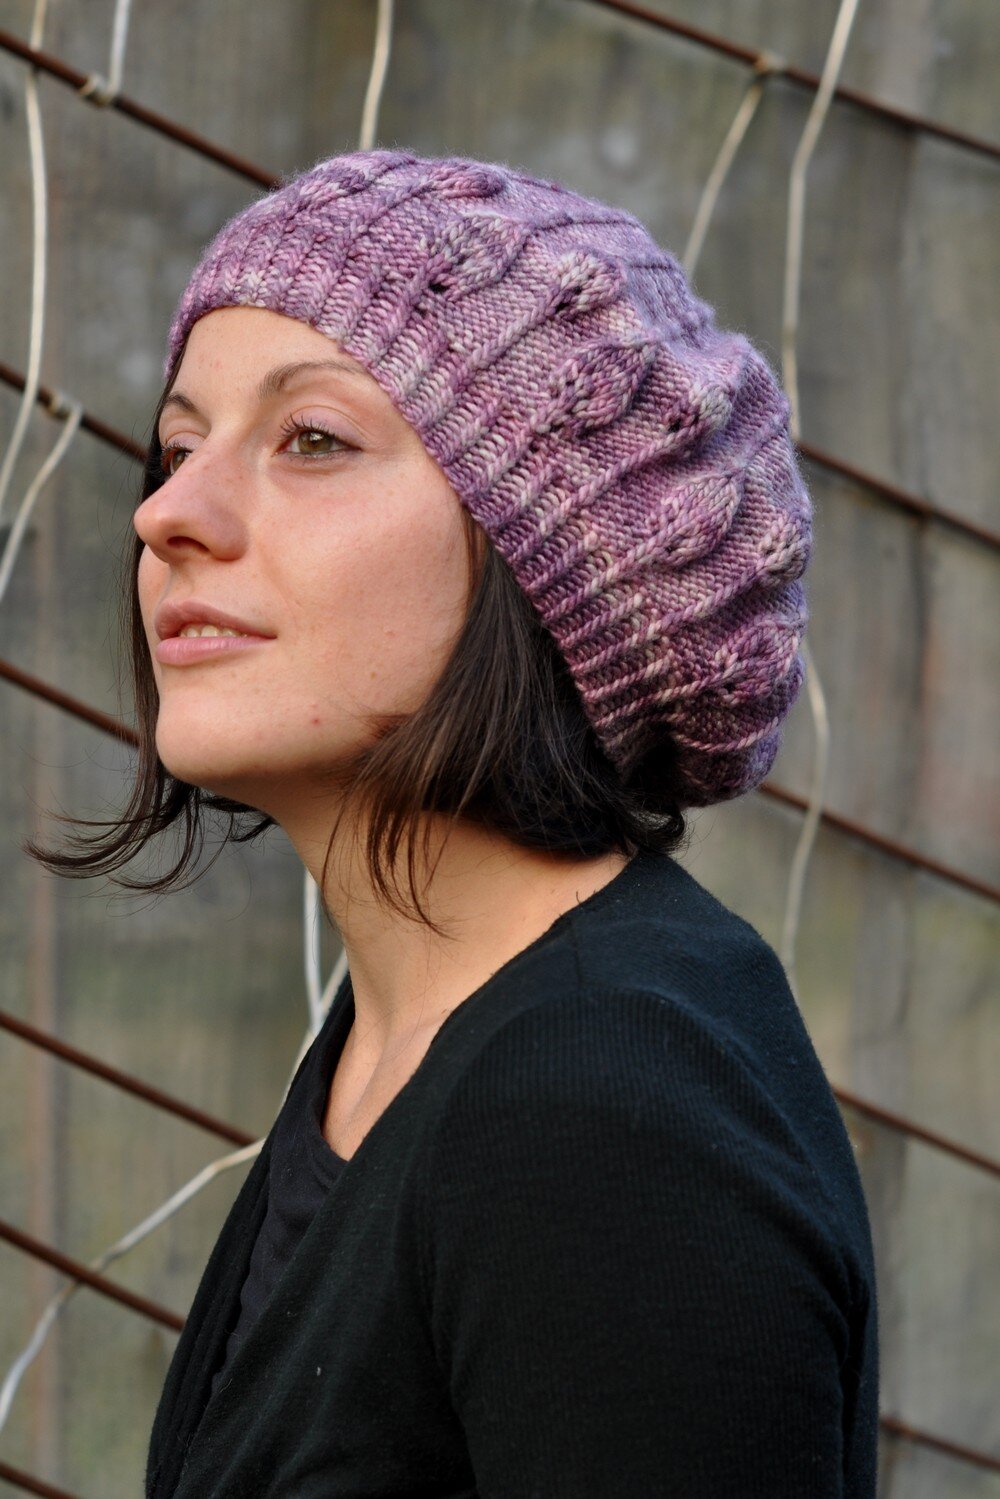 Limpetiole hand knitting beret pattern for DK weight yarn